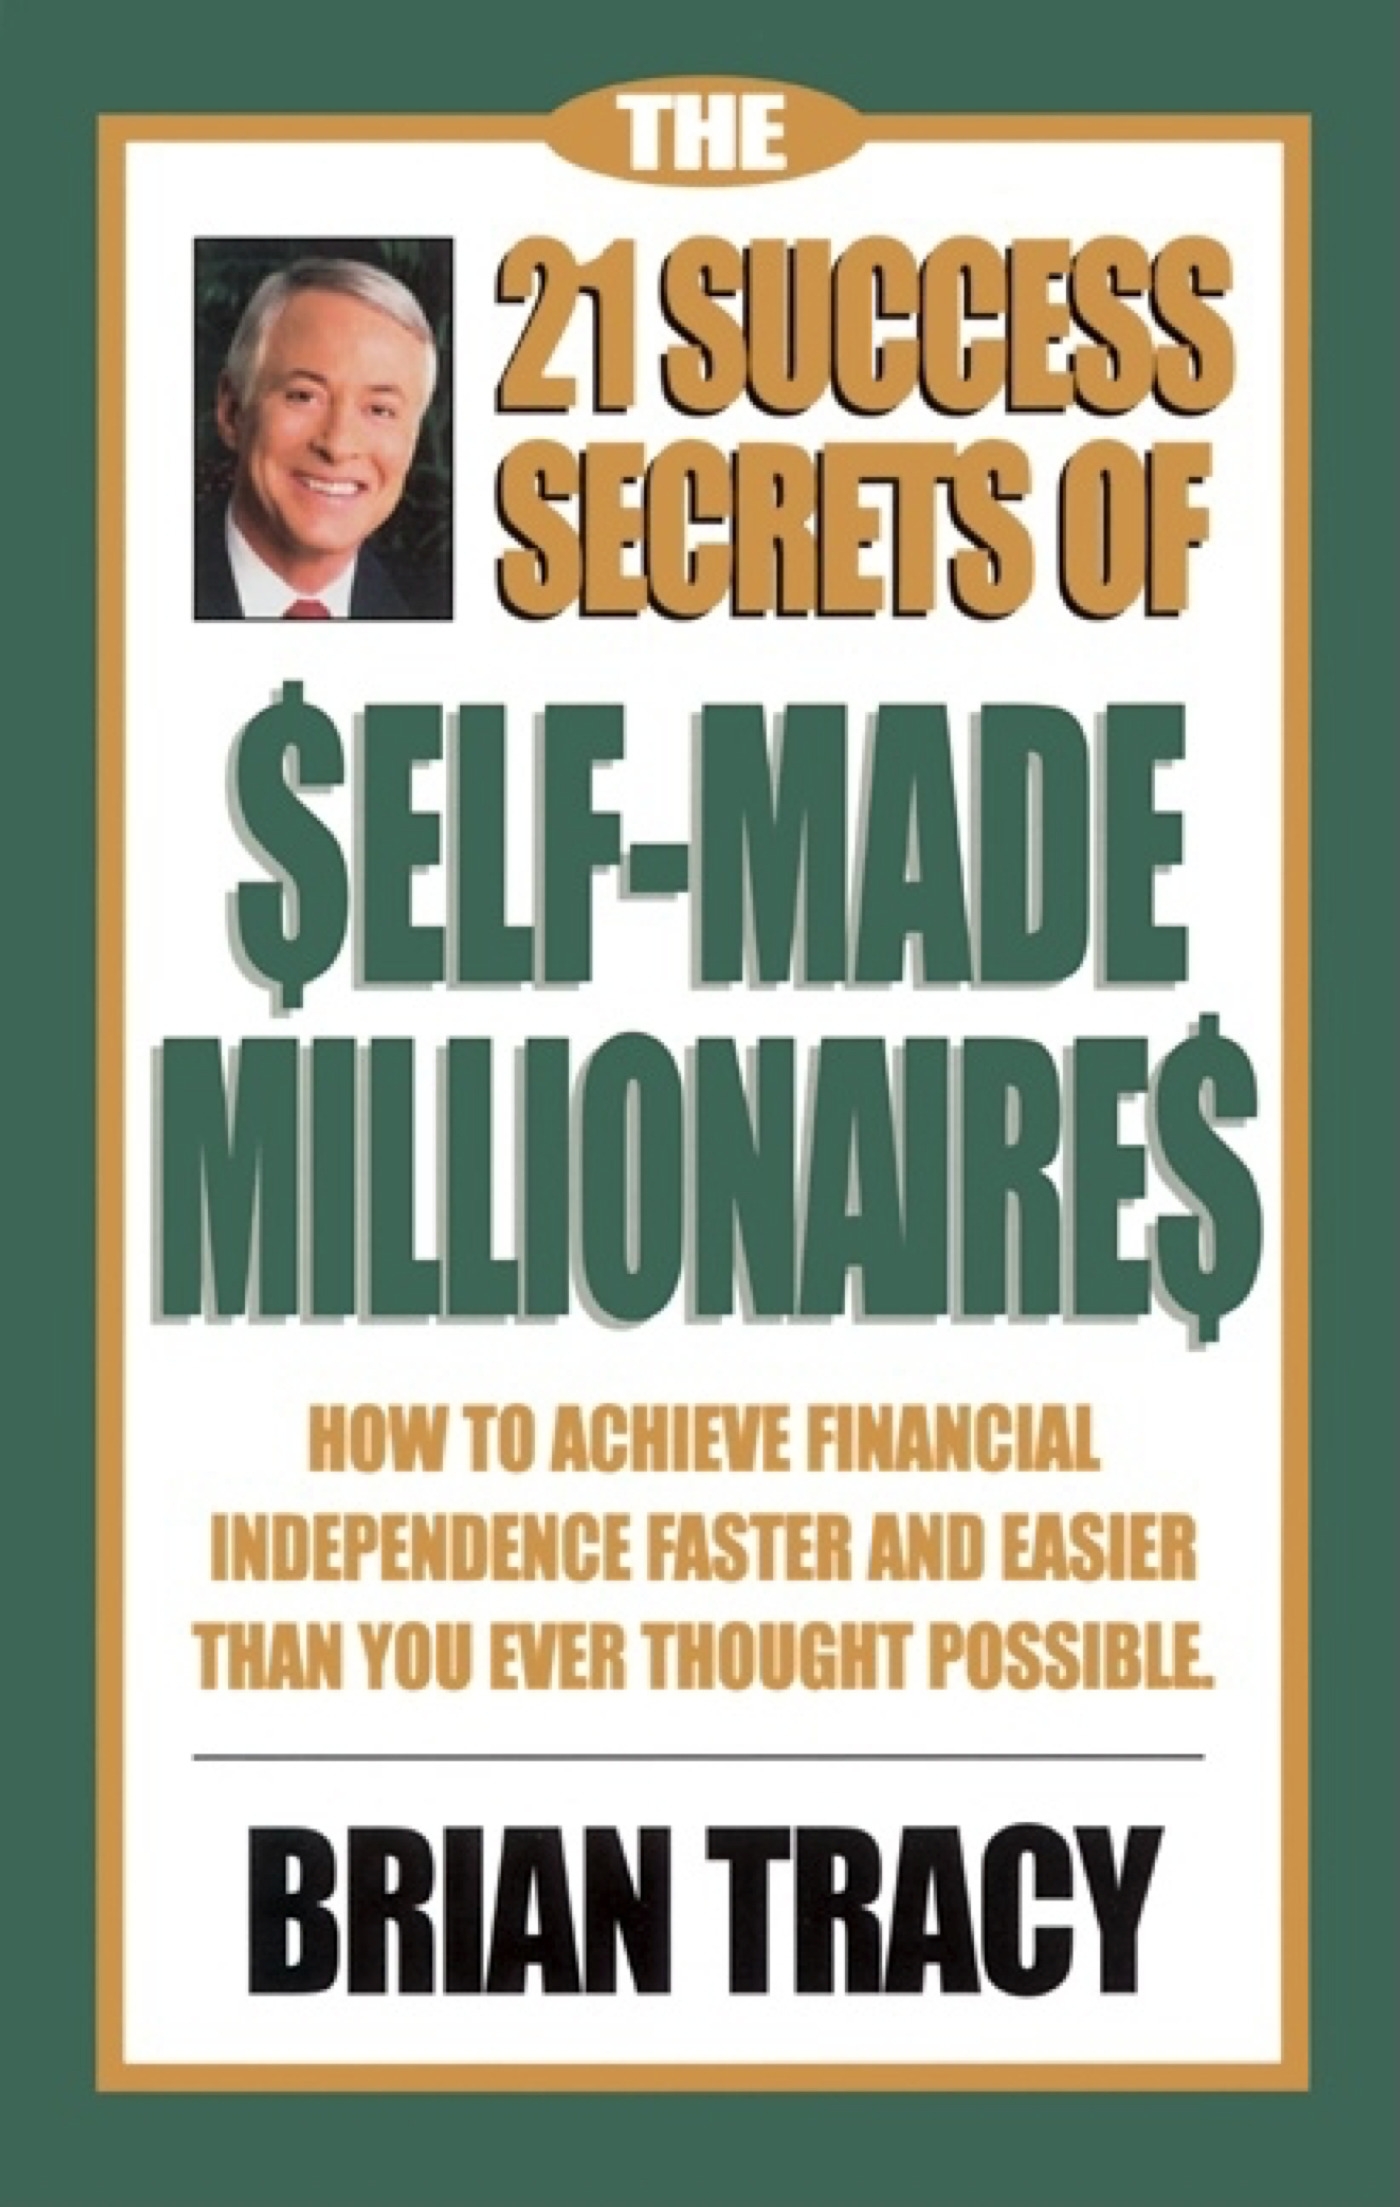 The 21 Success Secrets of SelfMade Millionaires by Brian Tracy